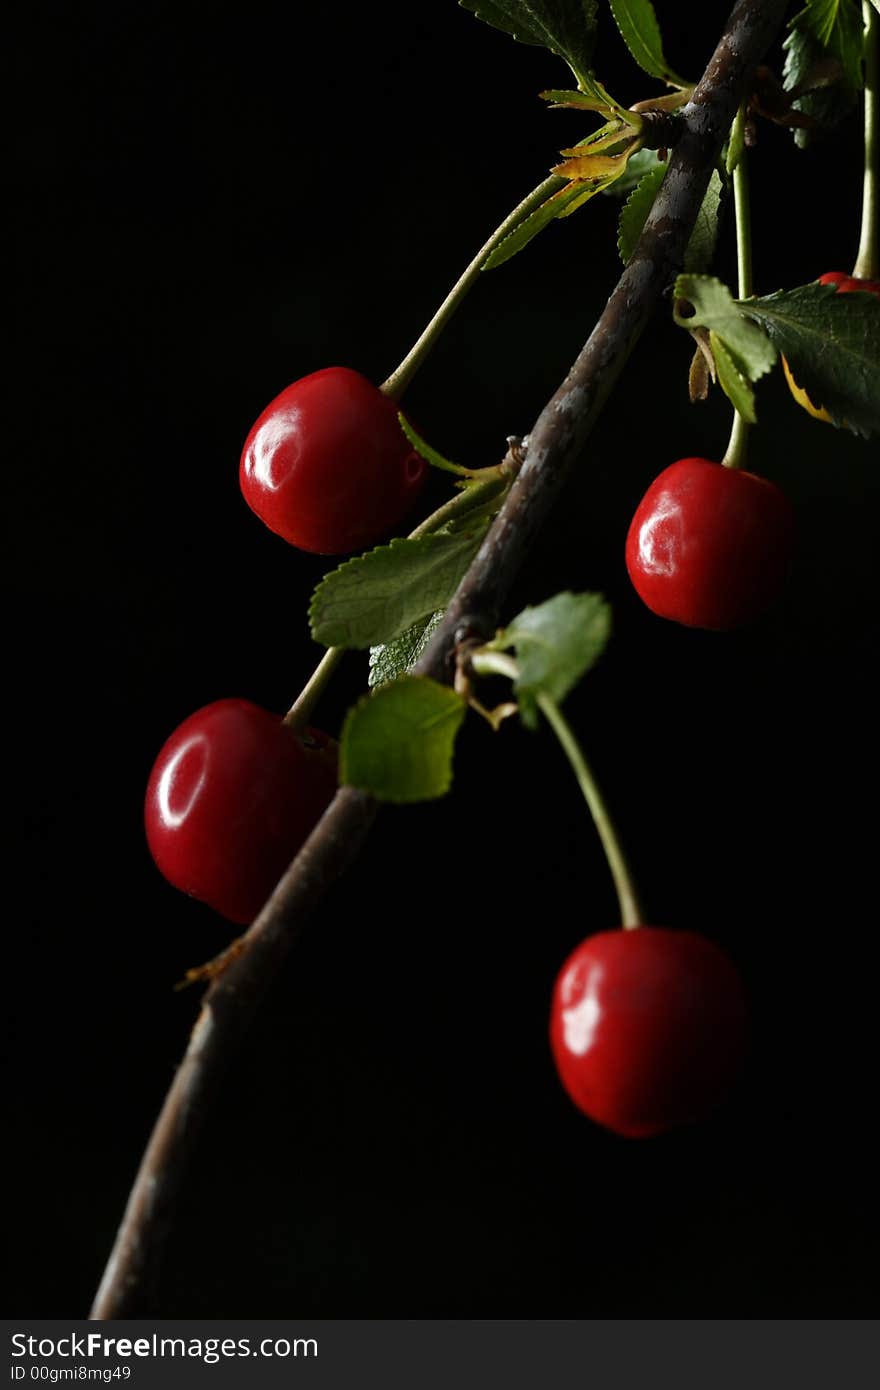 Sour cherries hanging in the tree